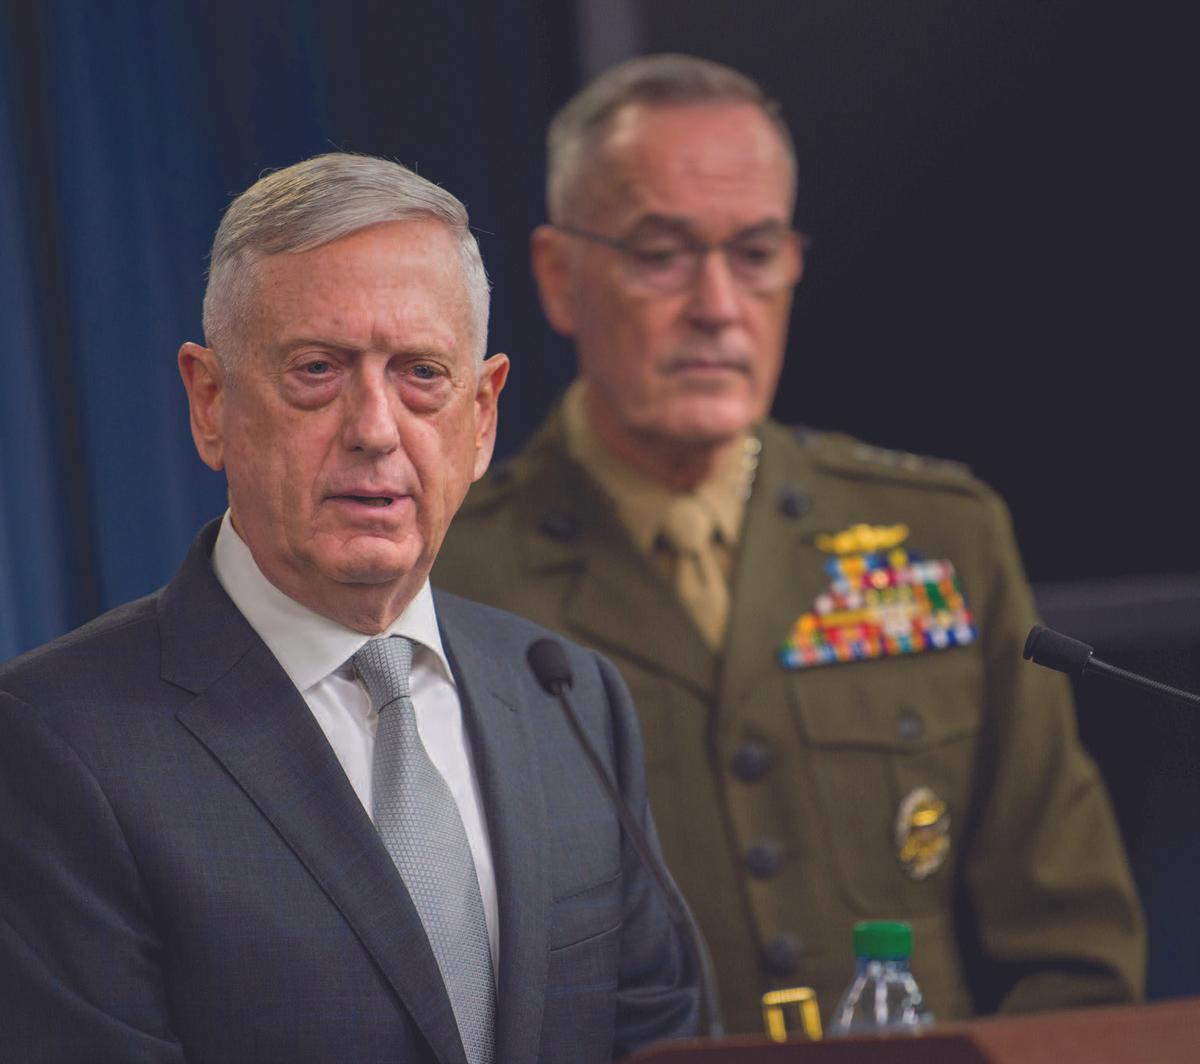 Defense Secretary Gen. Jim Mattis (L) and Gen. Joe Dunford, chairman of the Joint Chiefs of Staff, brief reporters following airstrikes on Syria on April 13. (DOD/ARMY SGT. AMBER I. SMITH)